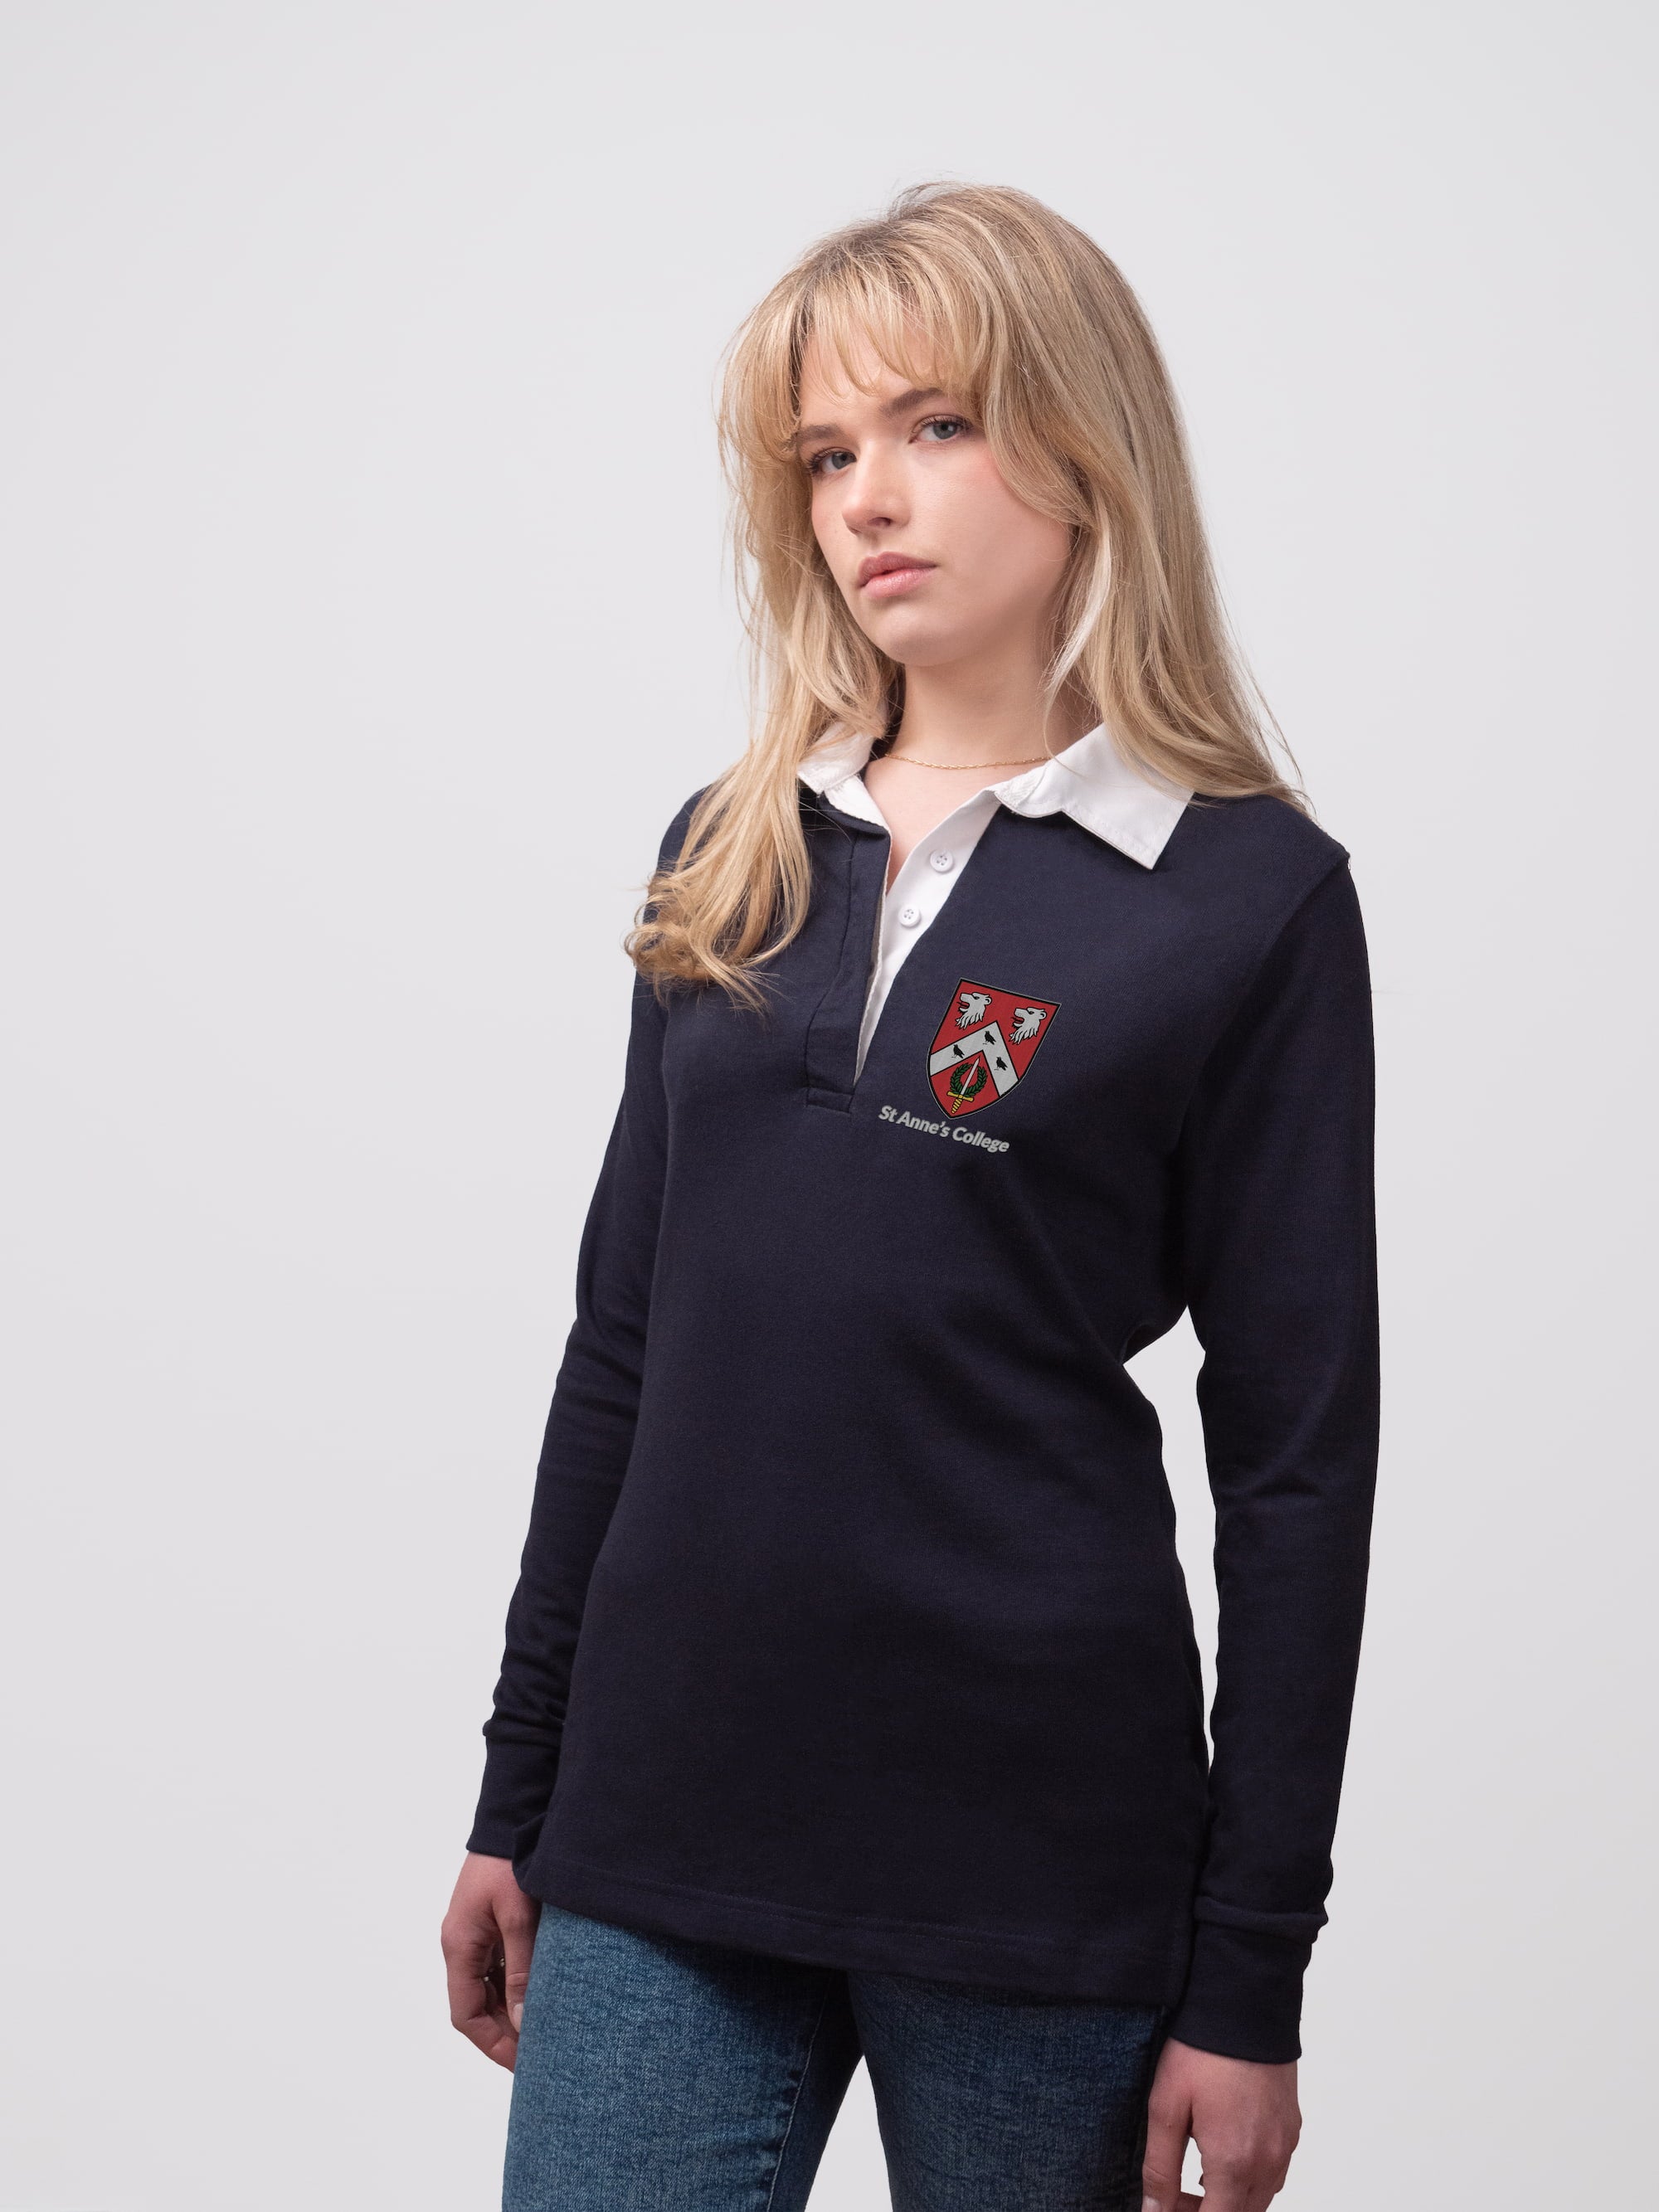 Student wearing a navy St Anne's College rugby shirt with embroidered crest